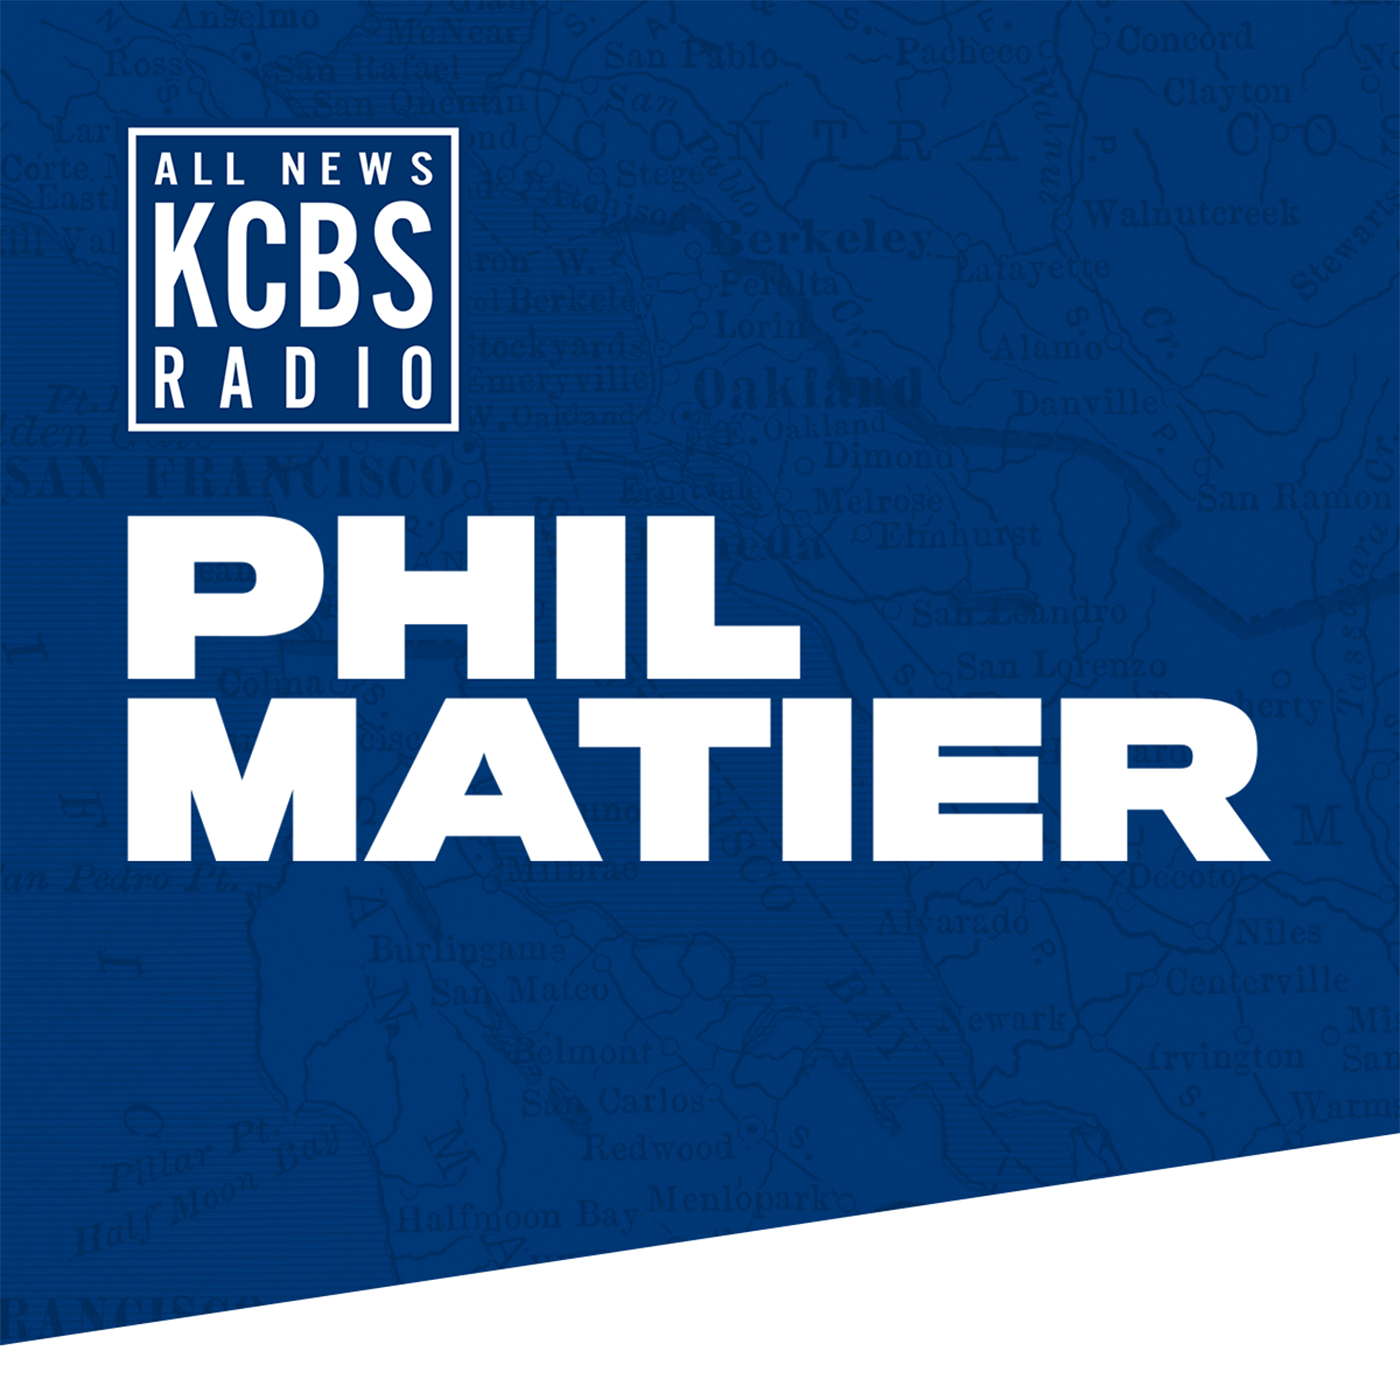 Phil Matier: CA vaccination process remains frustrating